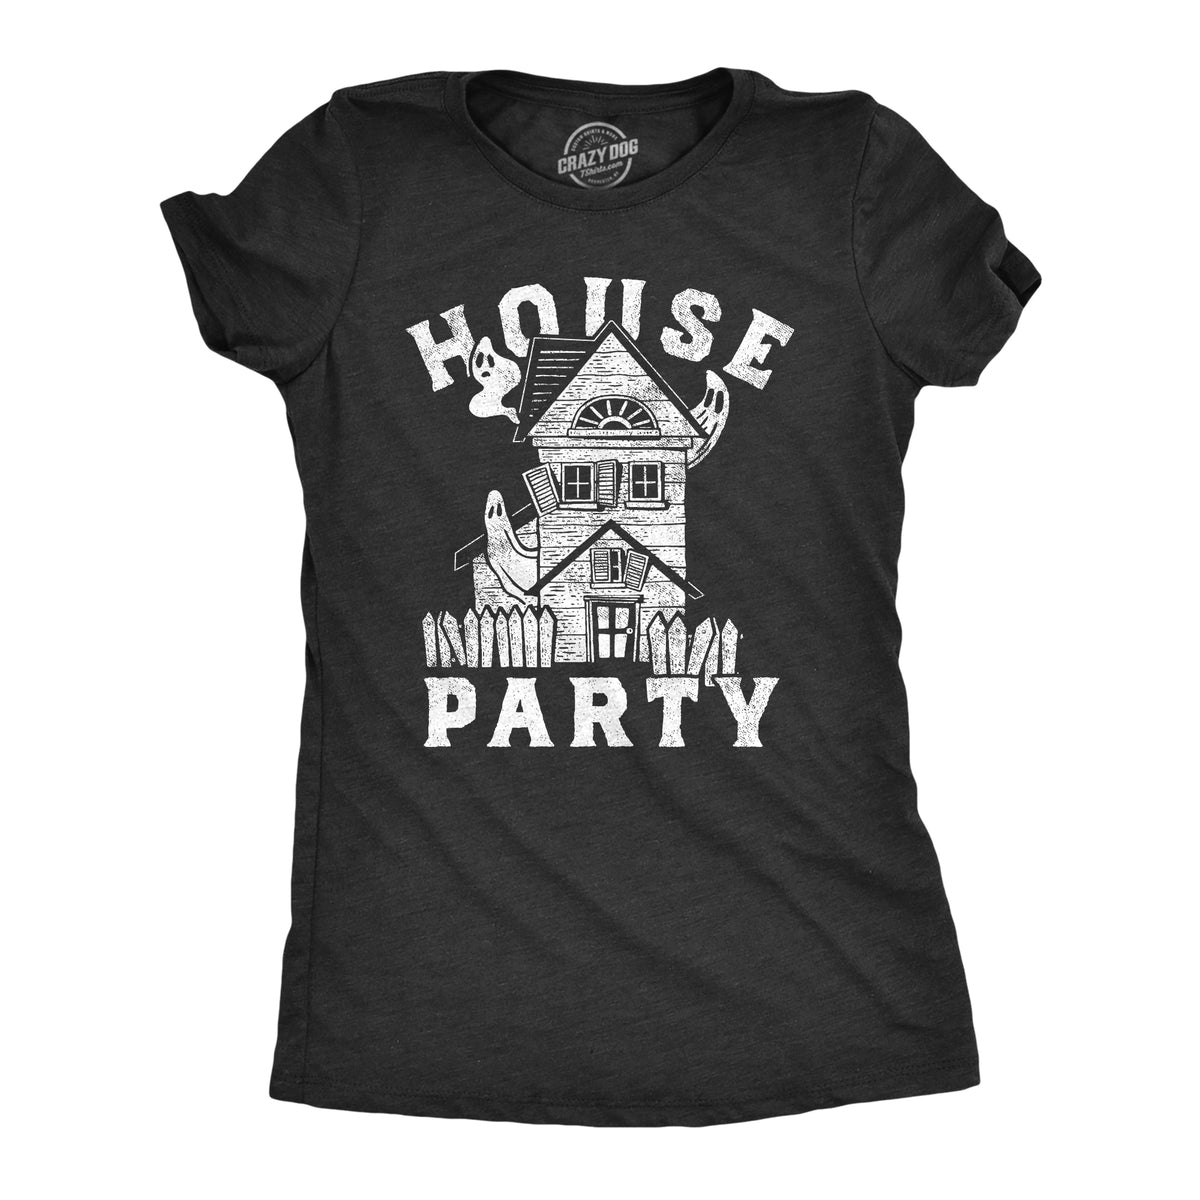 Funny Heather Black - HOUSE House Party Womens T Shirt Nerdy Halloween sarcastic Tee